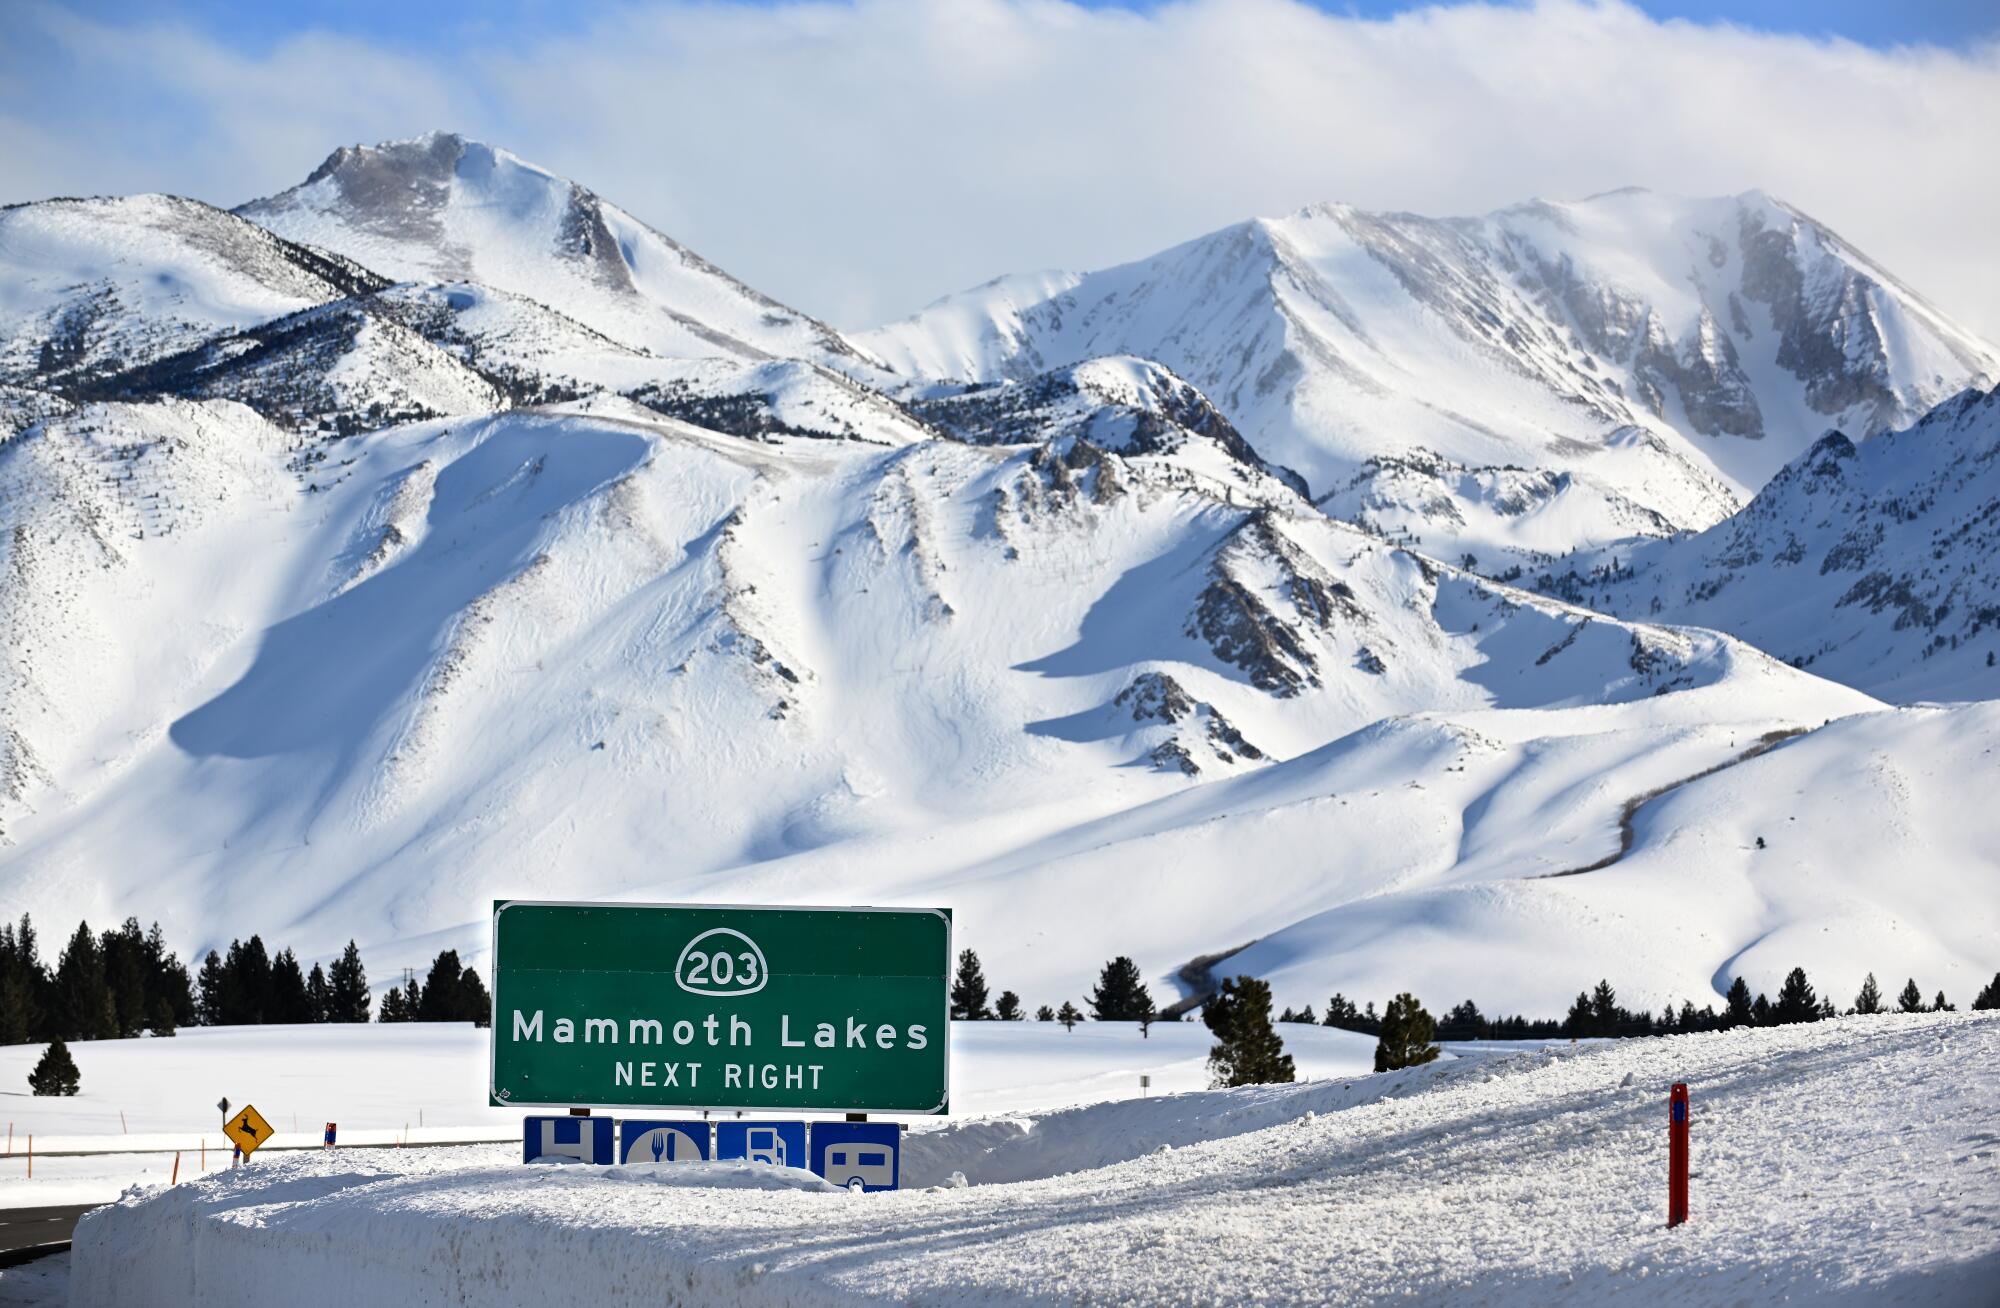 The Sierra Nevada mountains around Mammoth Lakes are caked with snow 